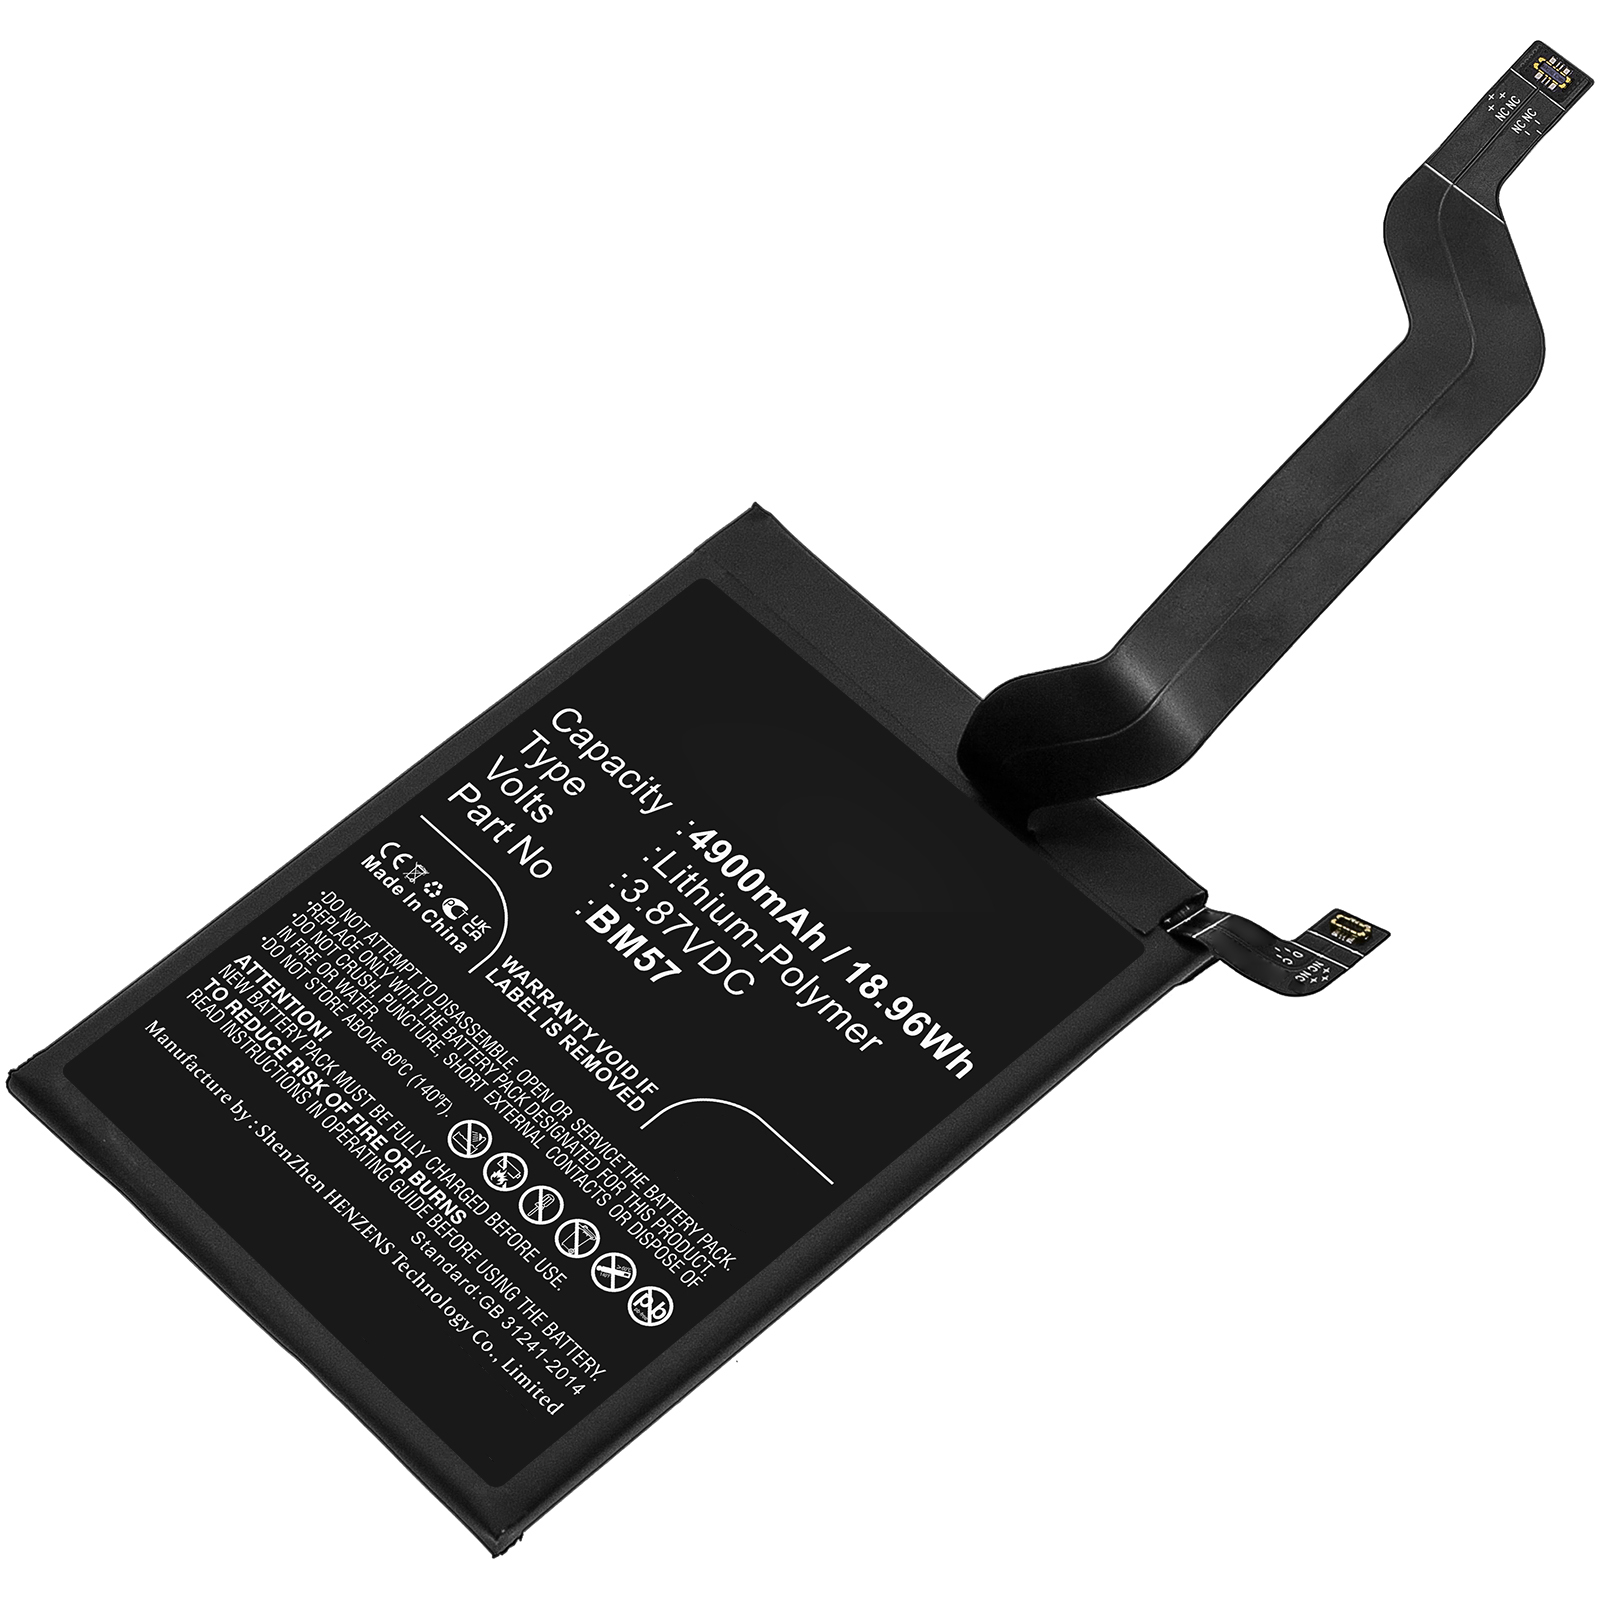 Synergy Digital Cell Phone Battery, Compatible with Xiaomi BM57 Cell Phone Battery (Li-Pol, 3.87V, 4900mAh)